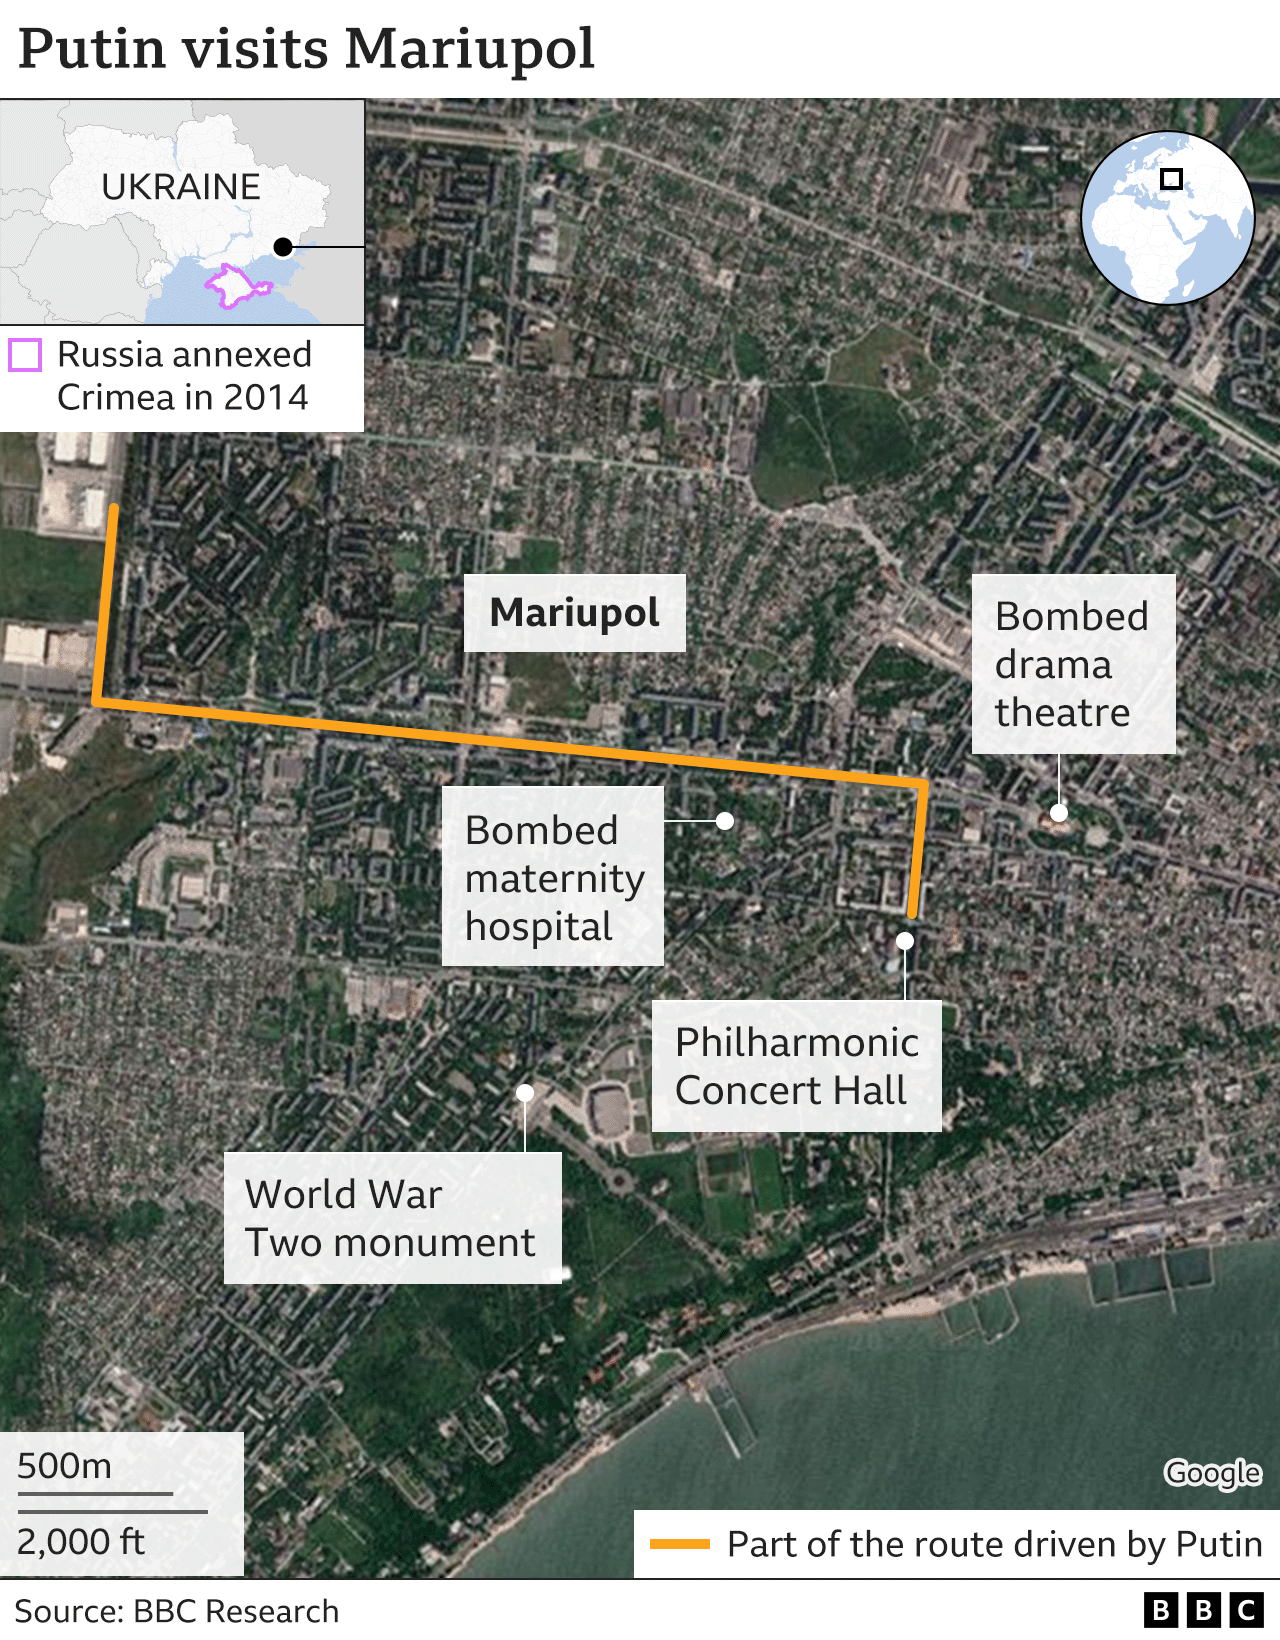 Map showing key sites Putin visited in Mariupol